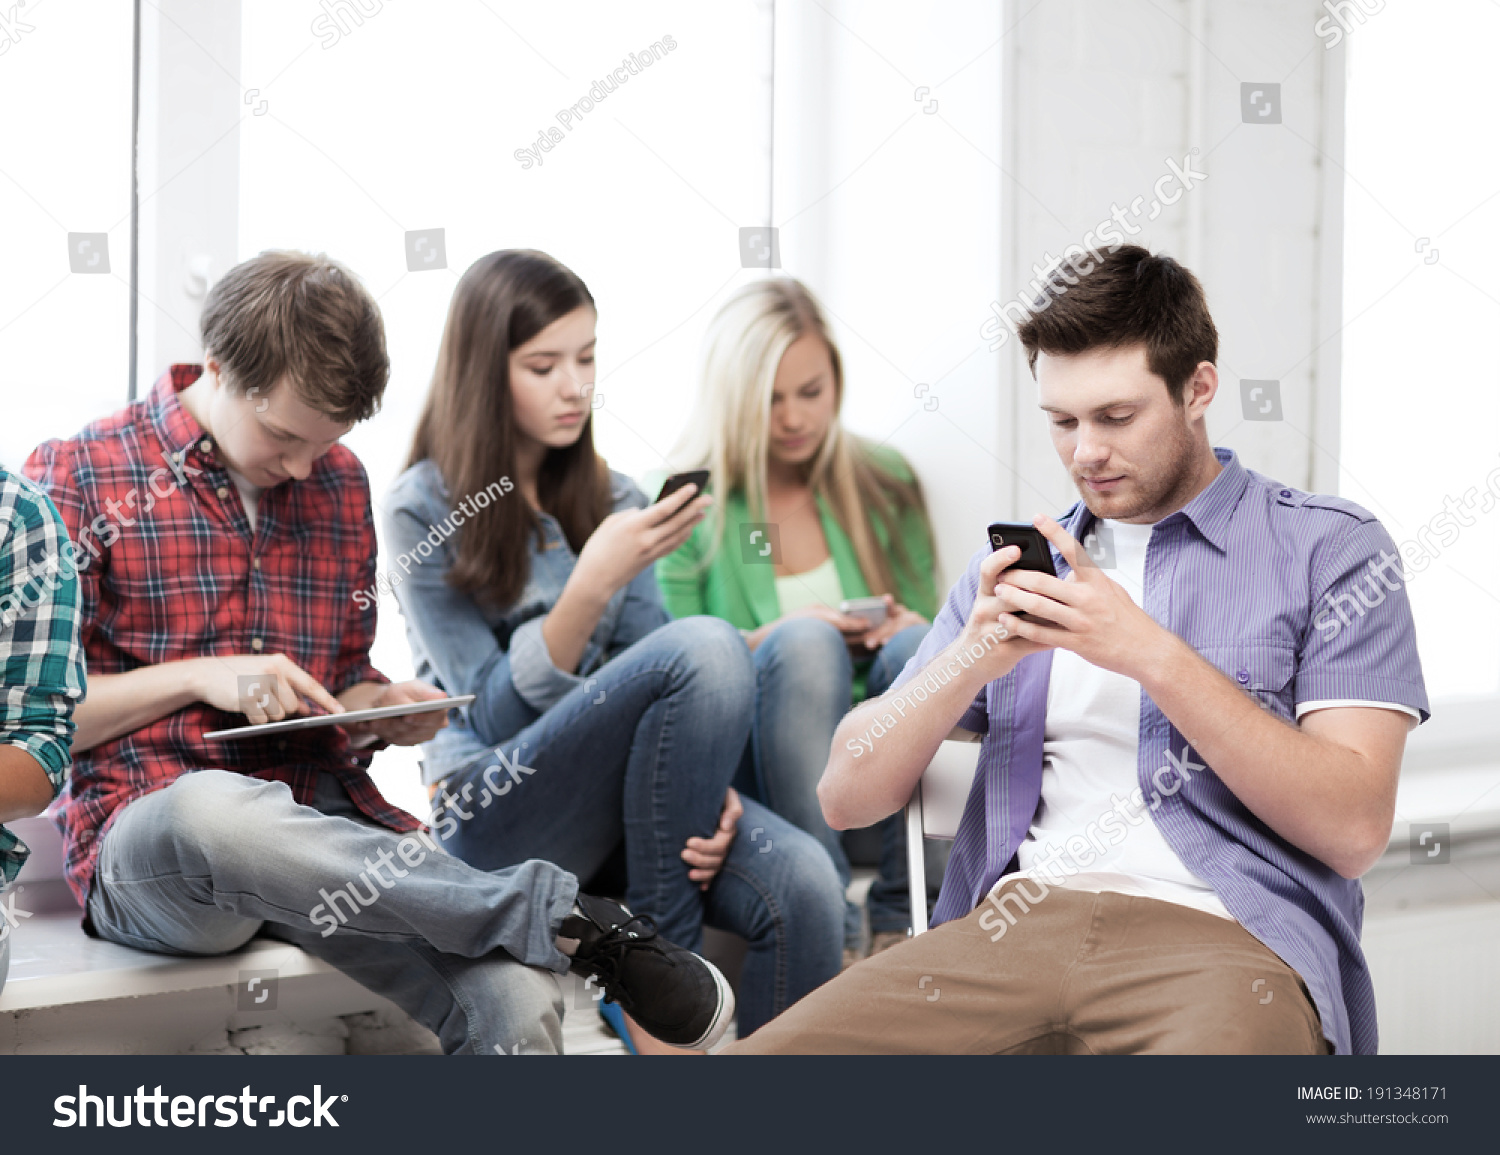 education and internet concept - students looking into phones and tablet pc #191348171